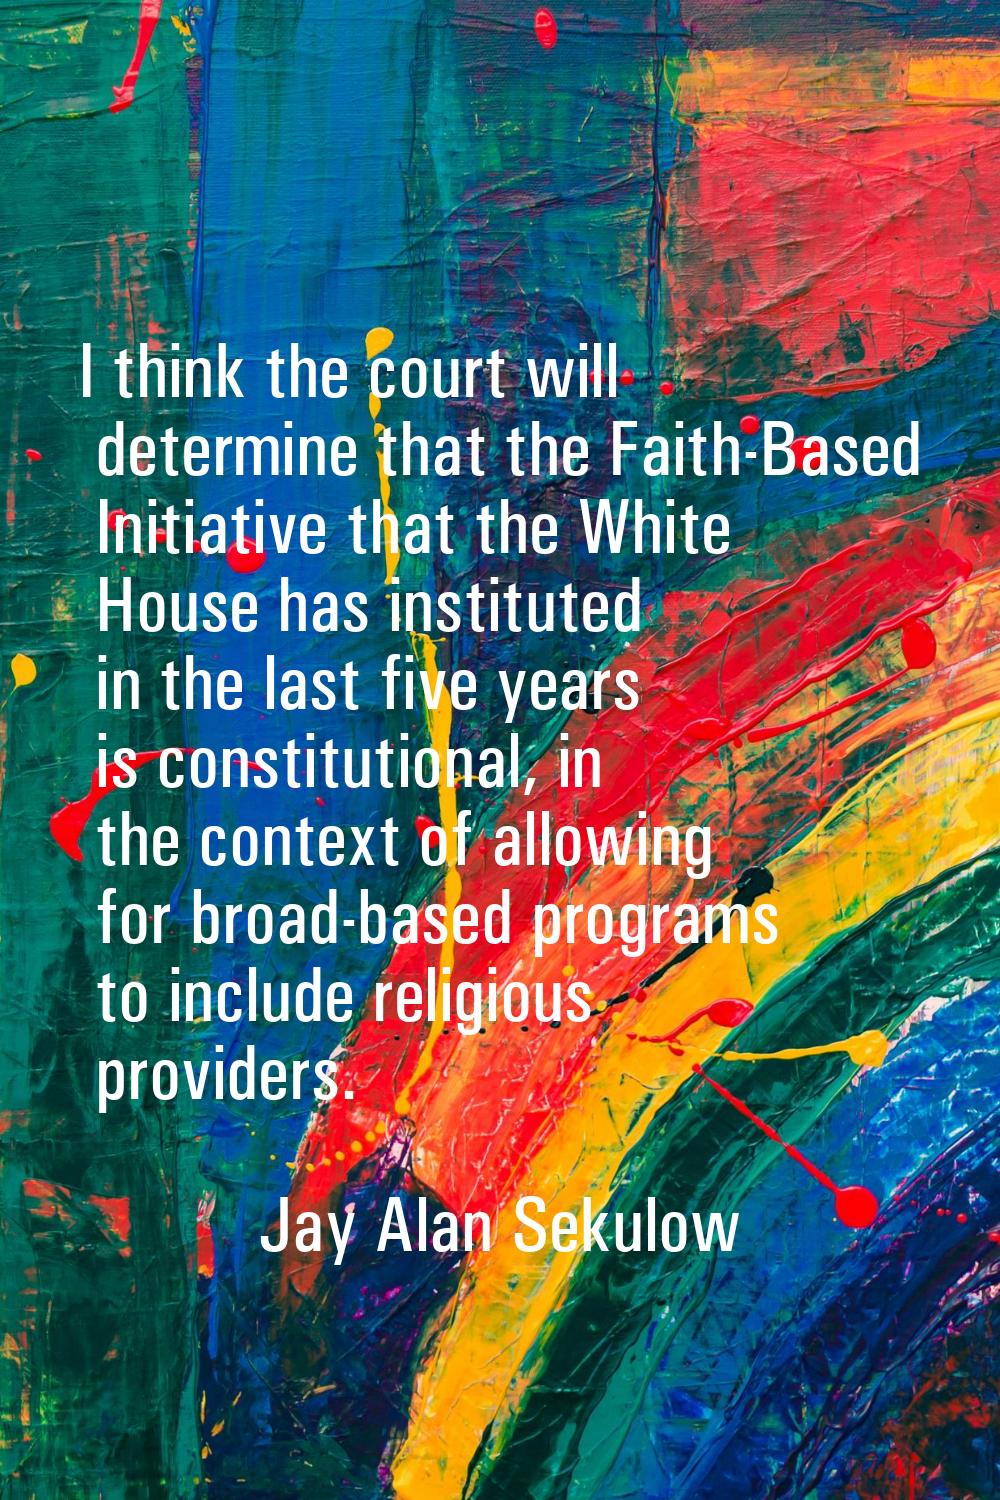 I think the court will determine that the Faith-Based Initiative that the White House has institute